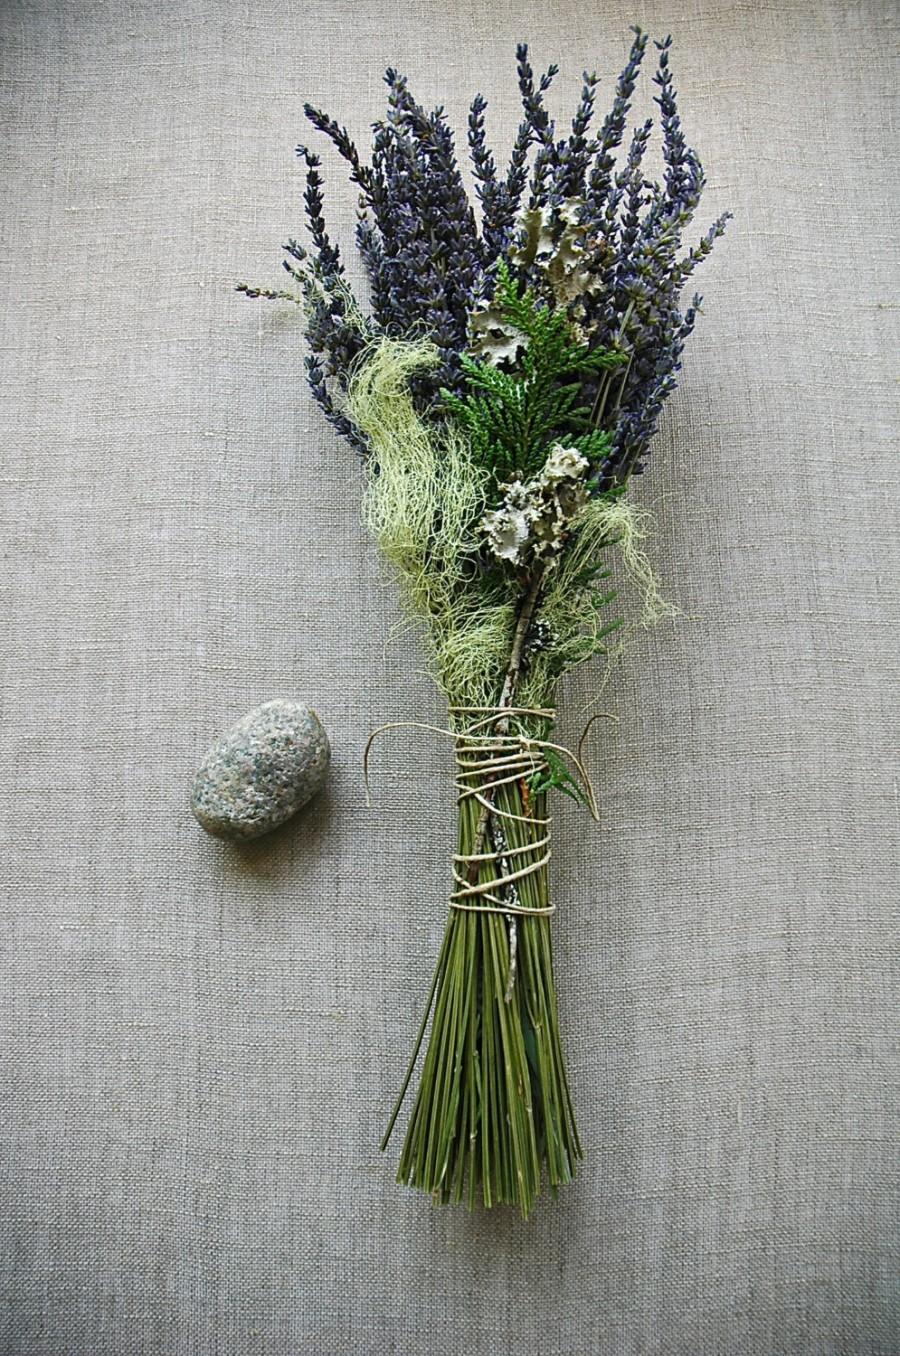 Mariage - Winter Wedding Bouquet Natural Woodland Brides Wedding Bouquet of English Lavender, Cedar, Lichens and Moss Tied with Natural Hemp Twine